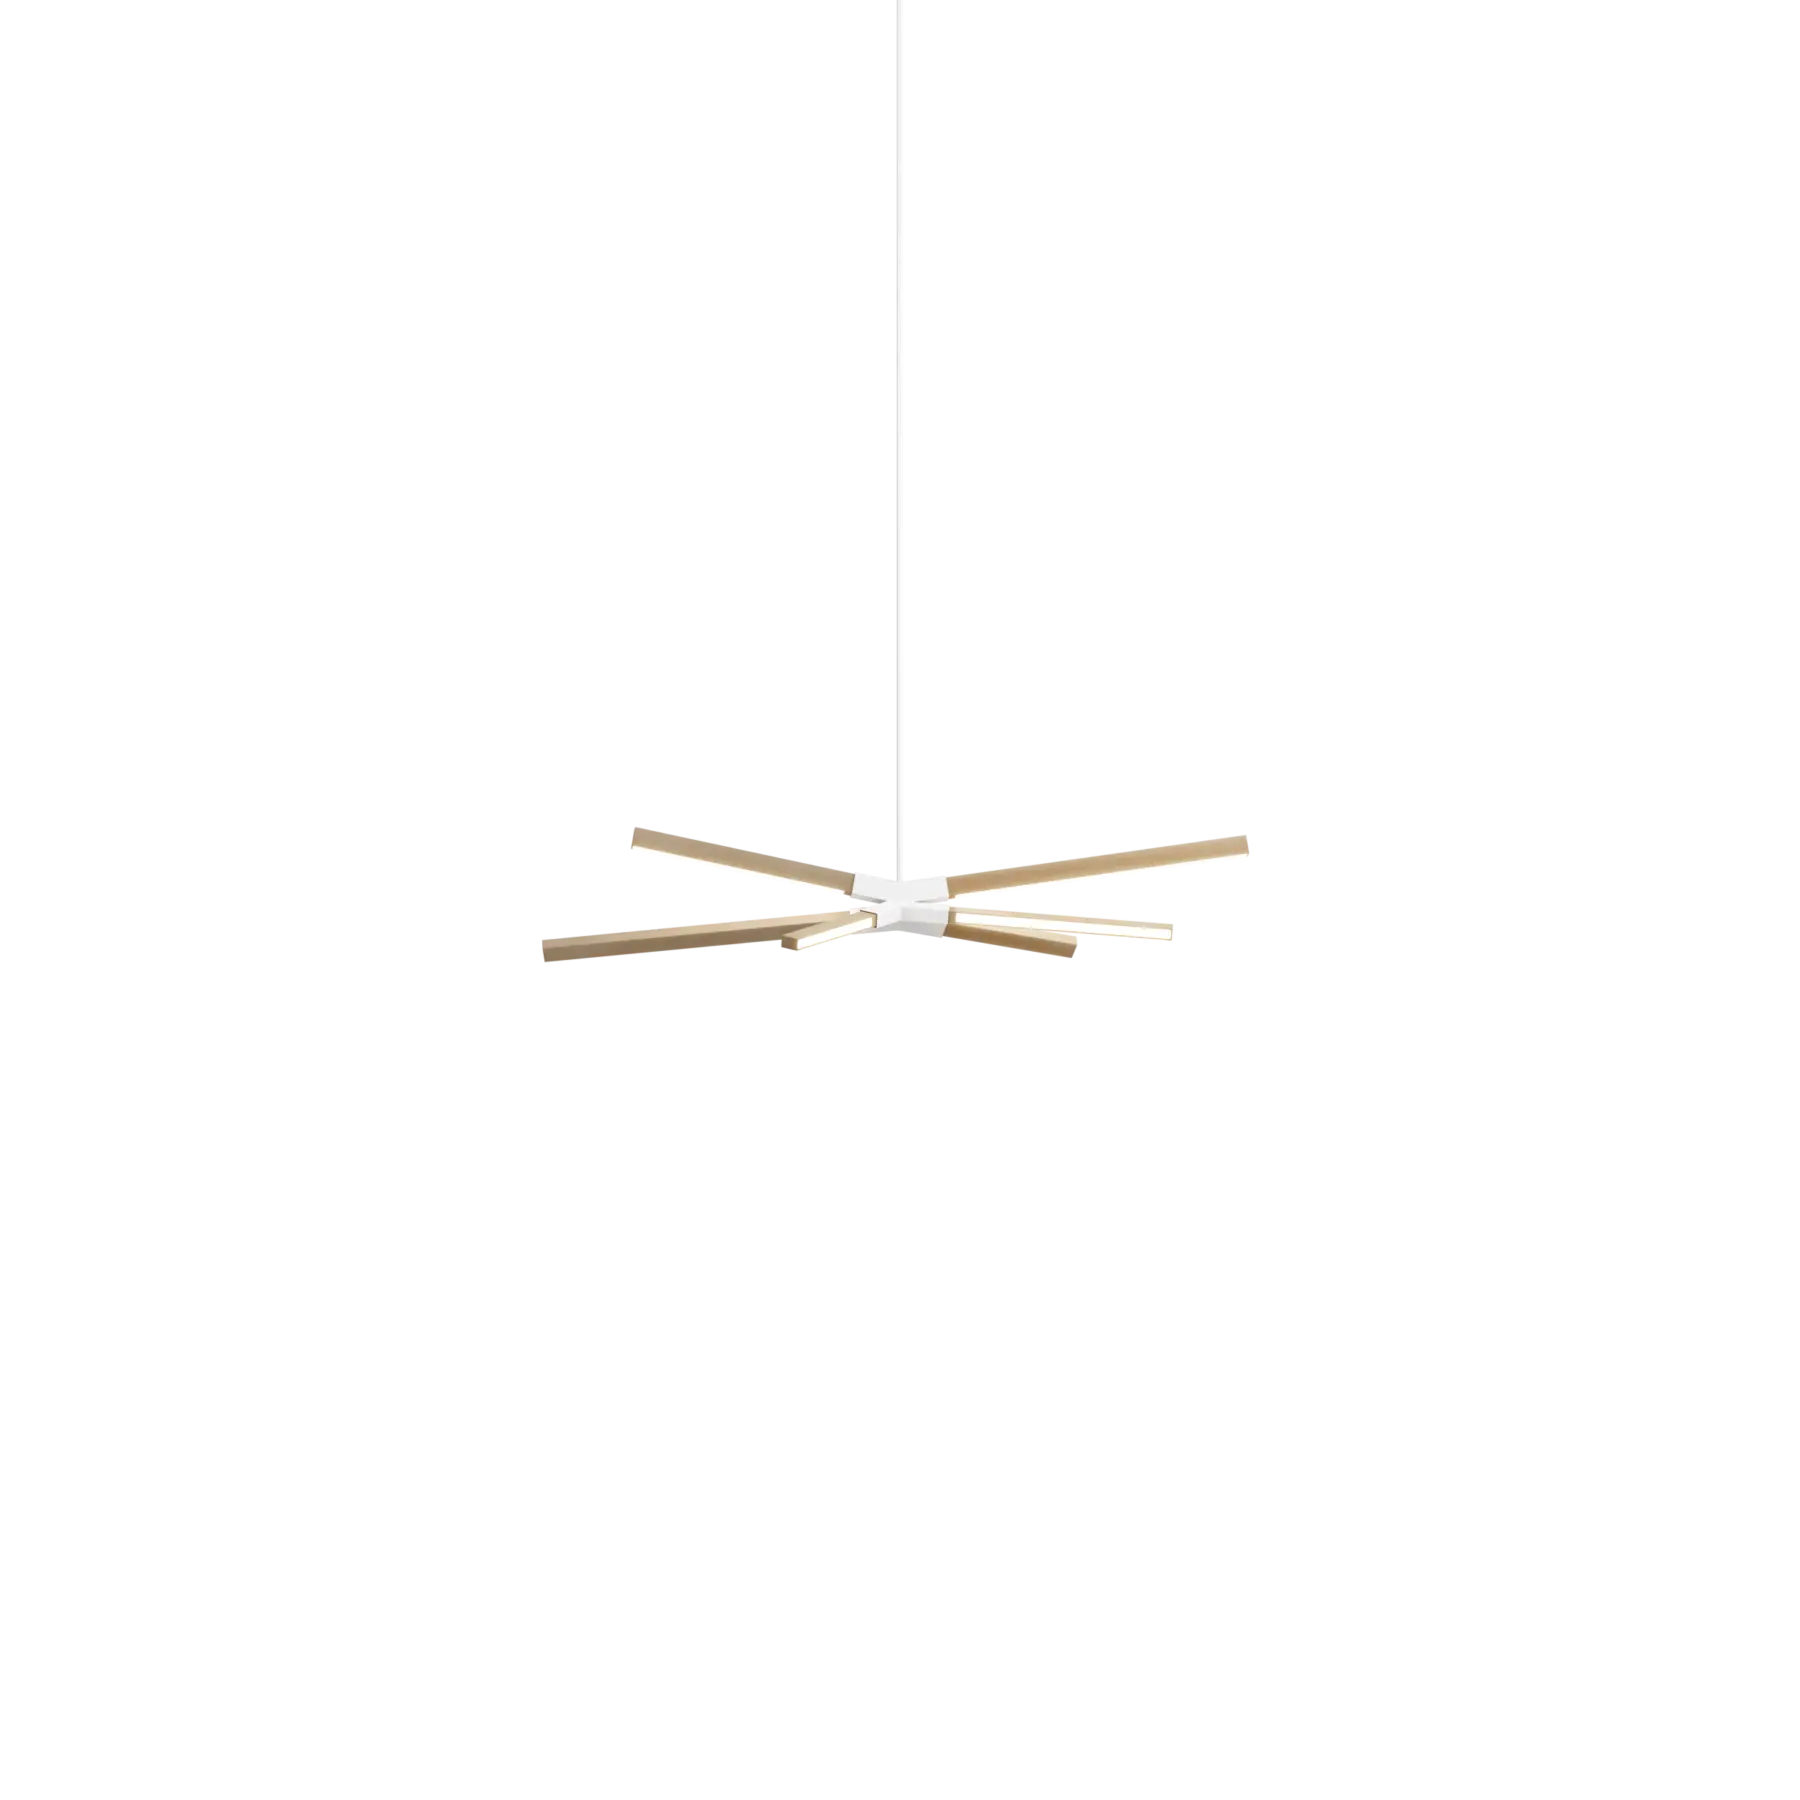 Image of a Stickbulb Skybang lighting fixture. The modern fixture consists of sleek wooden beams with multiple integrated LED bulbs.